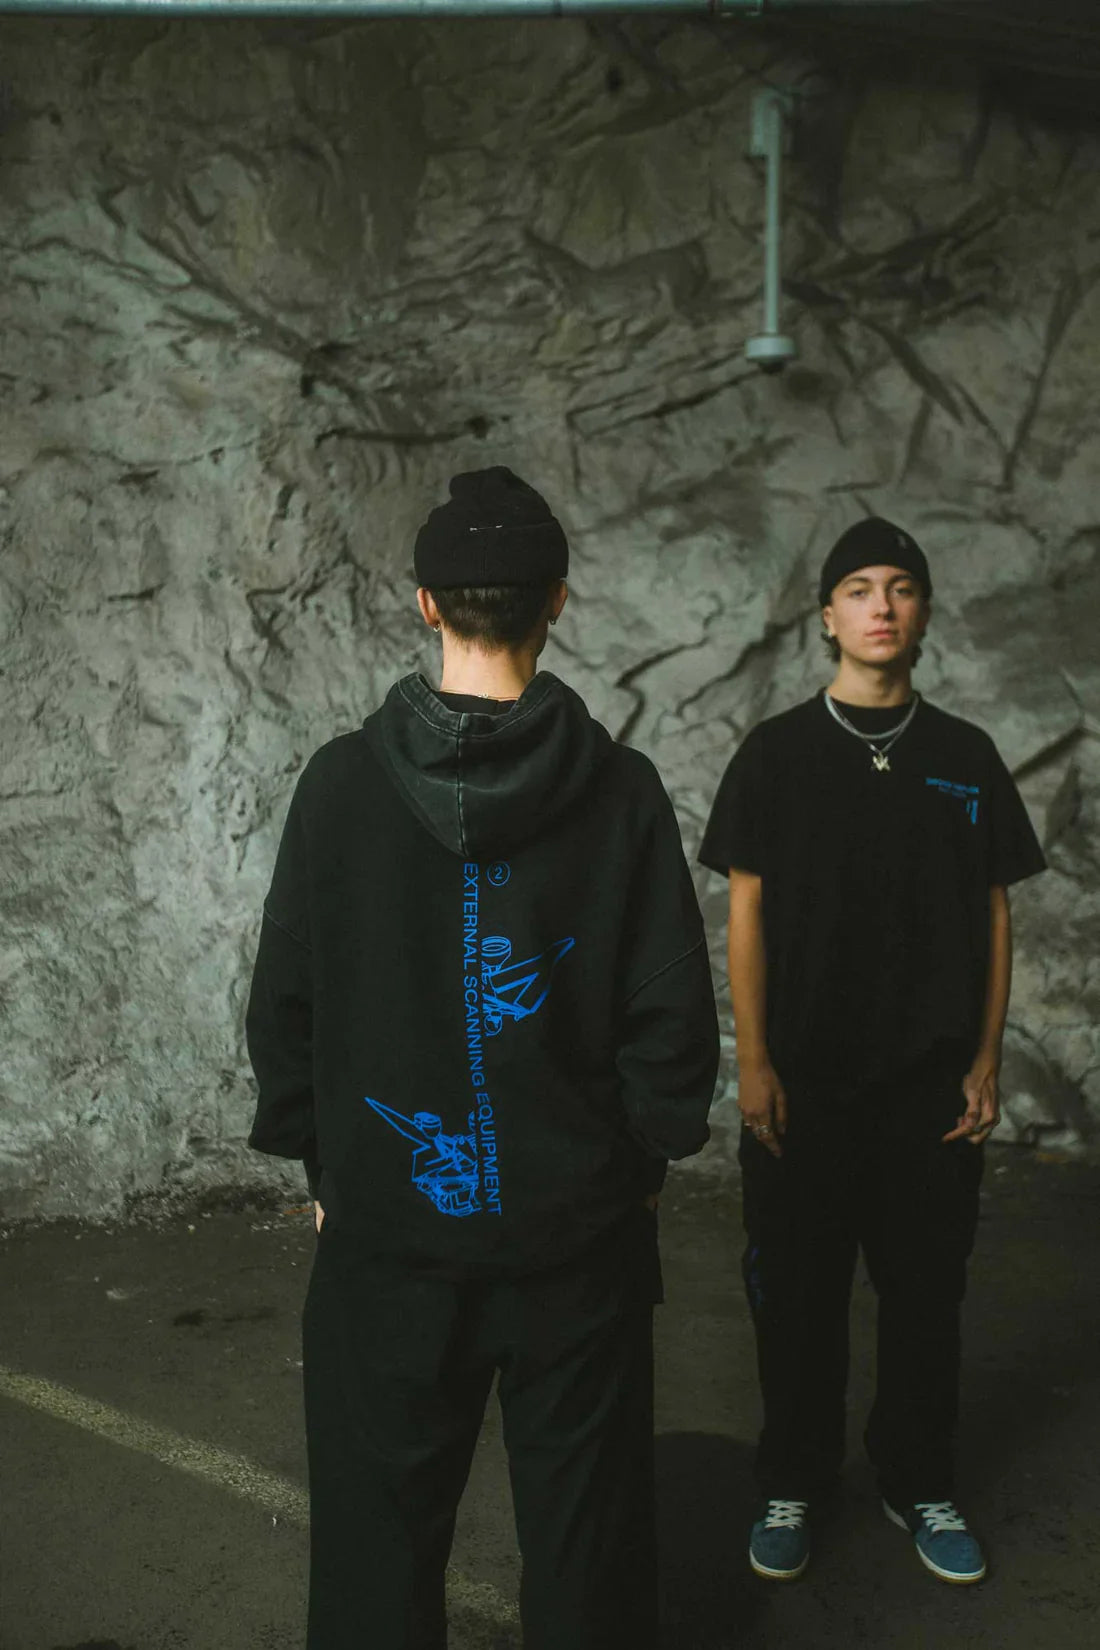 Two individuals in an urban setting, one facing away showcasing the back graphic of the black Drone Repair Shop Hoodie with blue design, and the other facing forward, both wearing beanies and casual attire.